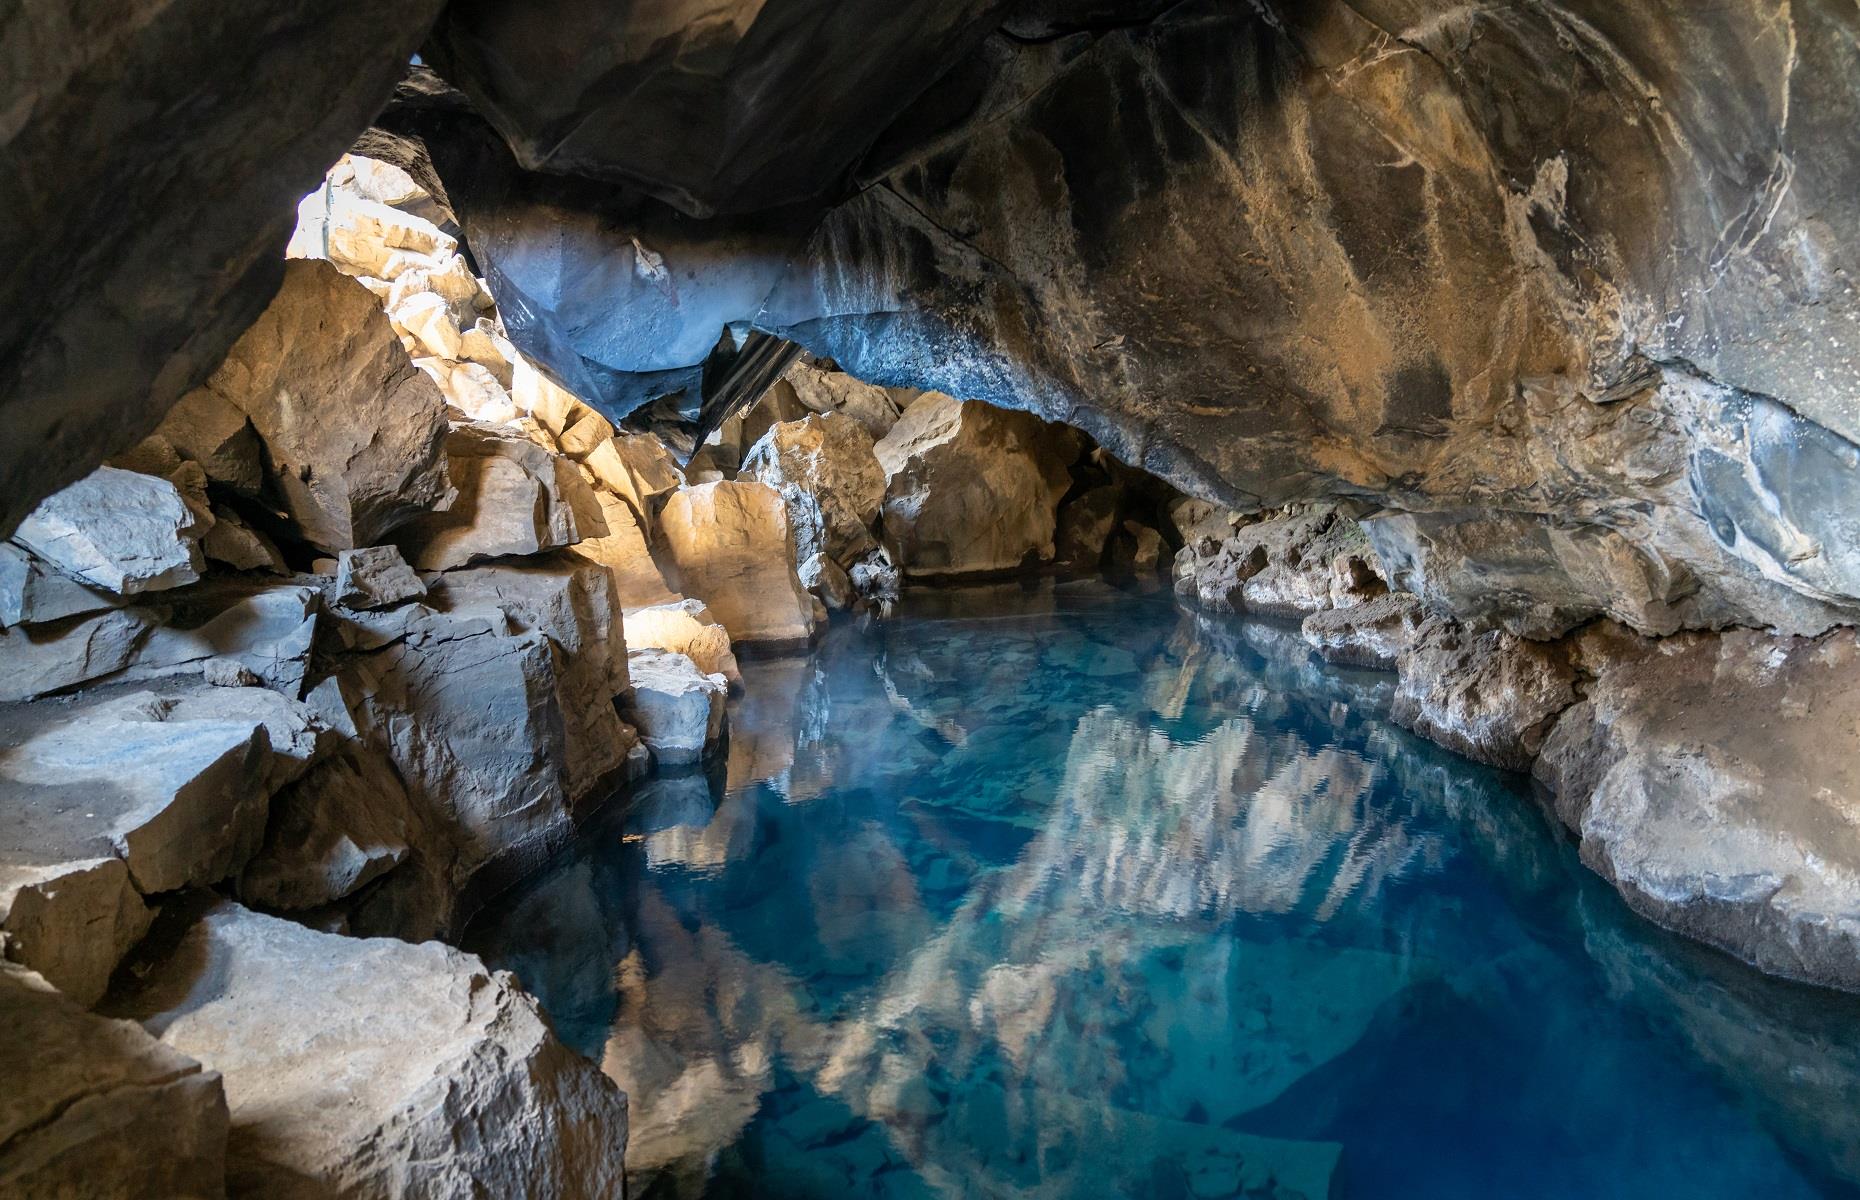 <p><em>Game of Thrones</em> fans might remember when Jon Snow and Ygritte ventured into a beautiful cave to escape the winter frost. Well, that romantic scene was filmed inside <a href="https://guidetoiceland.is/travel-iceland/drive/grjotagja">Grjótagjá</a>, a glistening lava cave in northern Iceland. The geothermal hot spring found inside was used by locals until the 1970s, after which the volcanic caldera of Krafla erupted nine times, rendering the water too hot to touch. As such, bathing is no longer allowed in Grjótagjá, but you can step inside to soak up its serene splendor.</p>  <p><a href="https://www.loveexploring.com/galleries/74880/the-worlds-most-incredible-caves-caverns?page=1"><strong>These are the world's most incredible caves and caverns</strong></a></p>